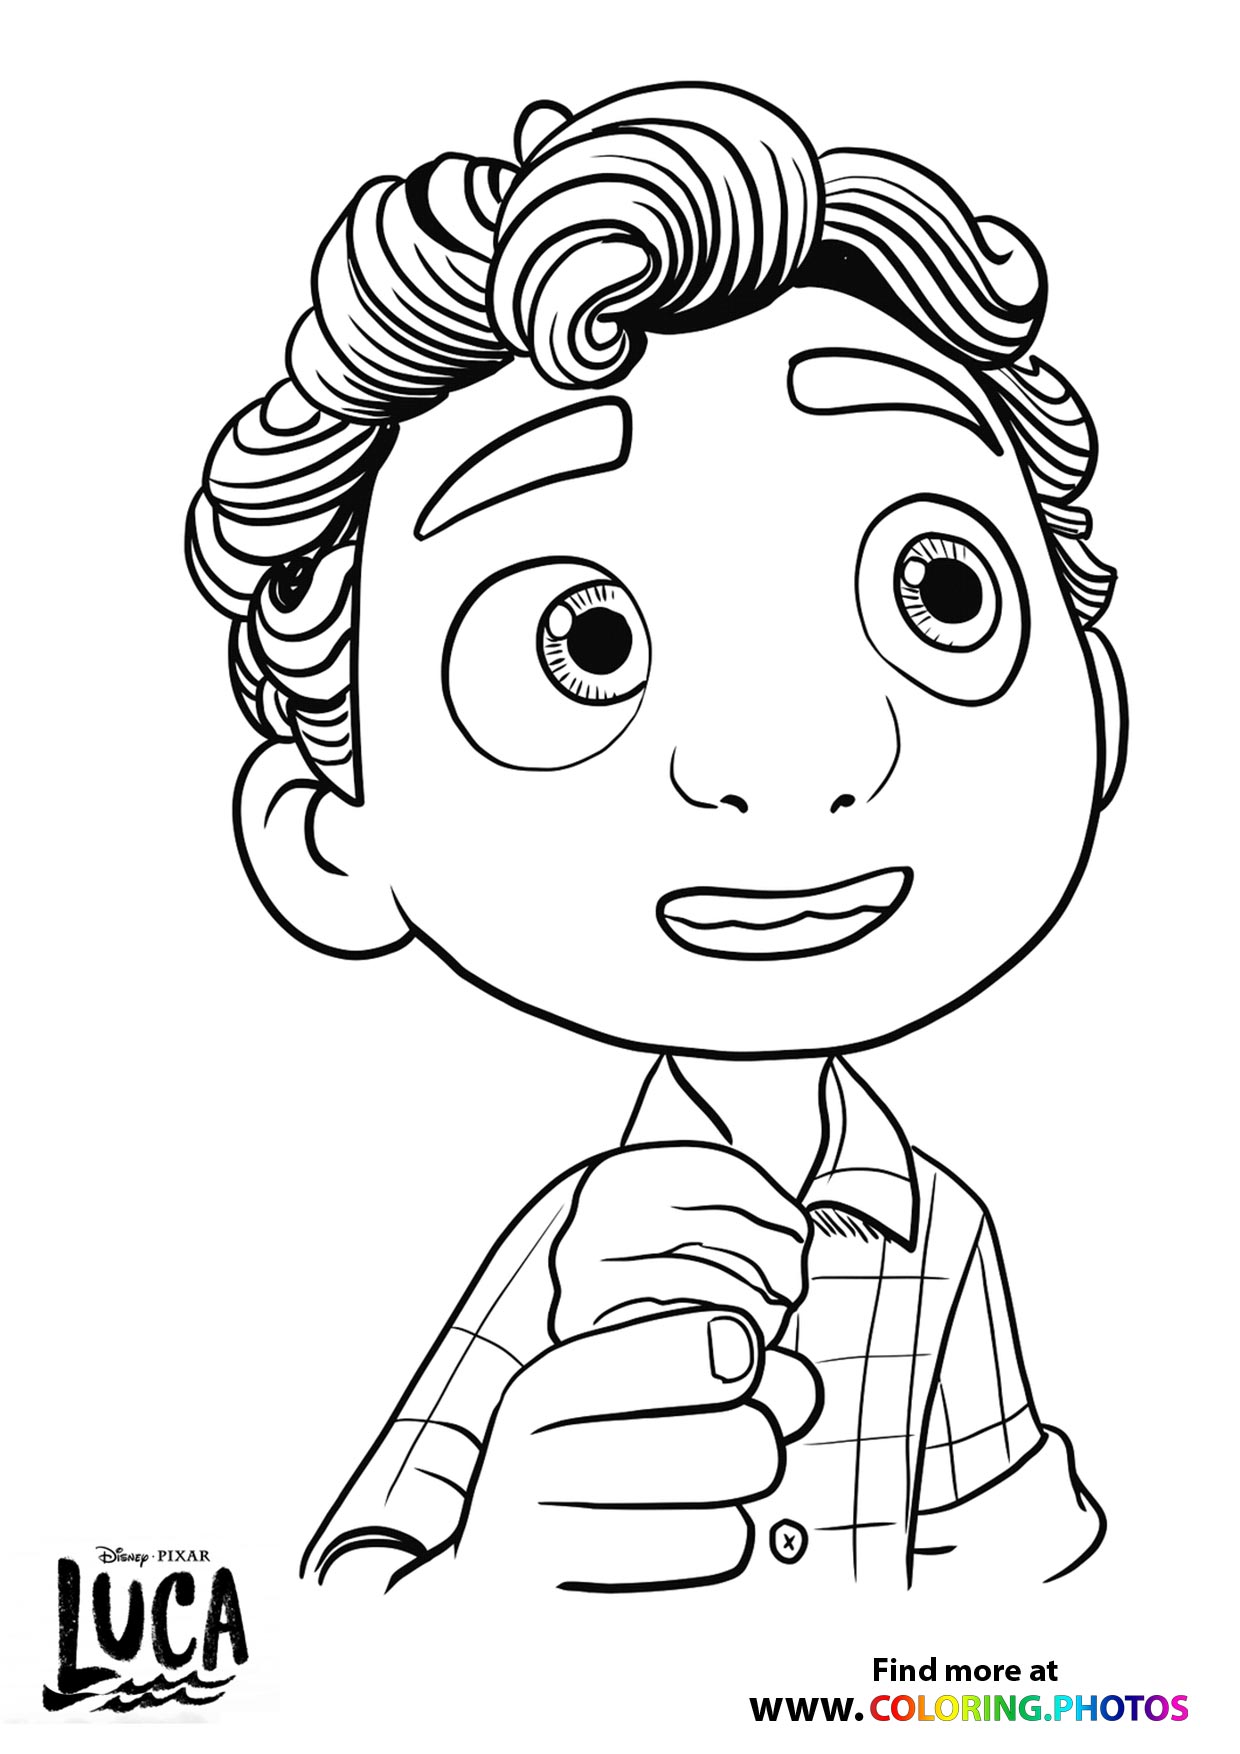 Luca eating Icecream Coloring Pages for kids